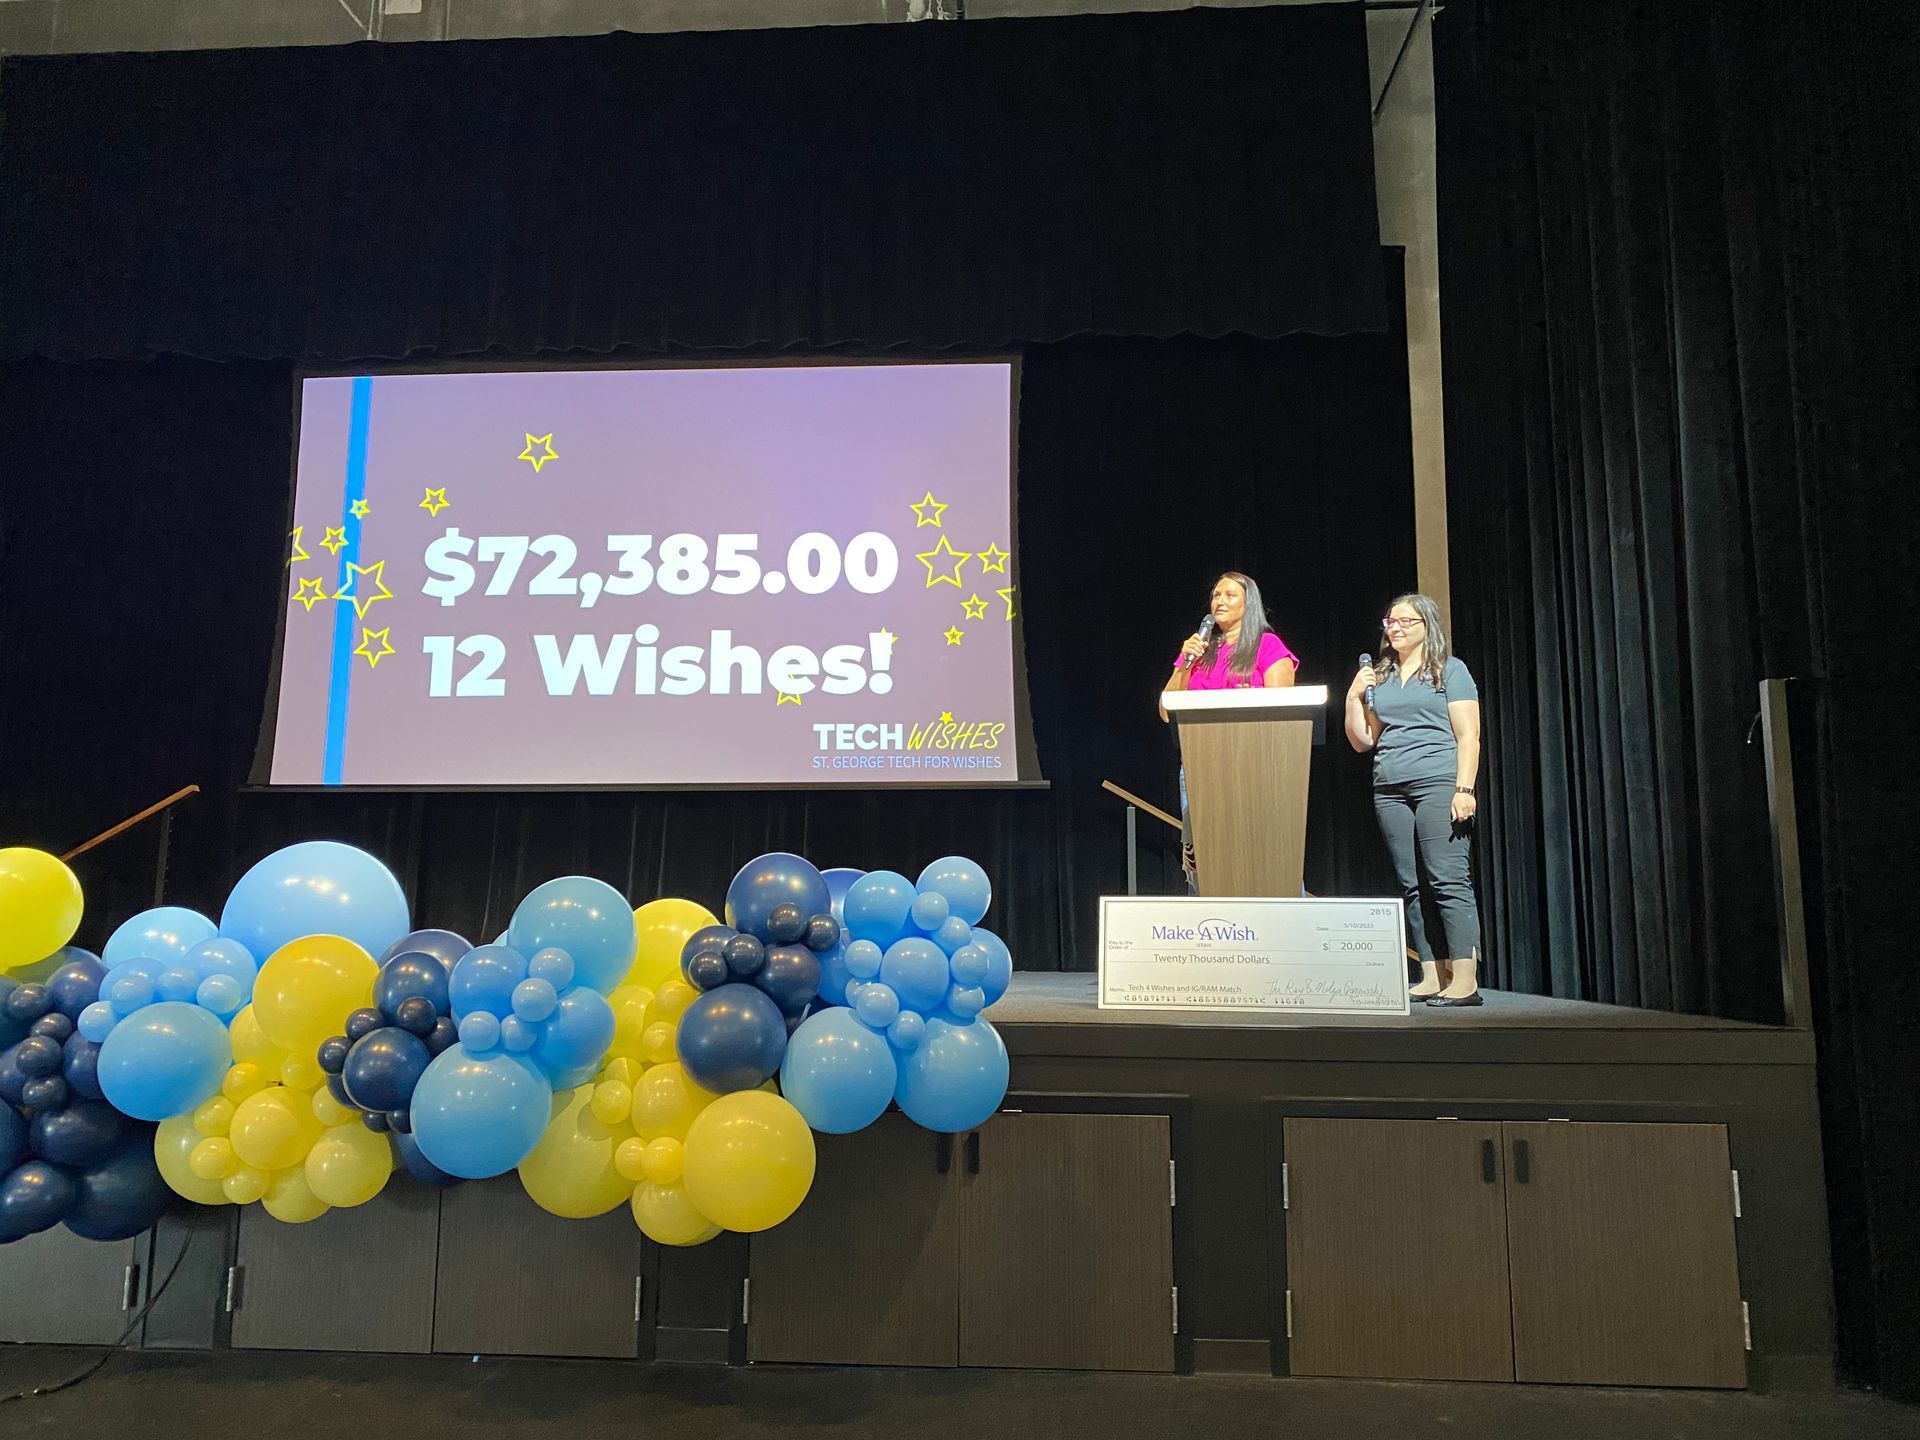 A woman stands at a podium in front of a screen that says $ 72,385,000 12 wishes